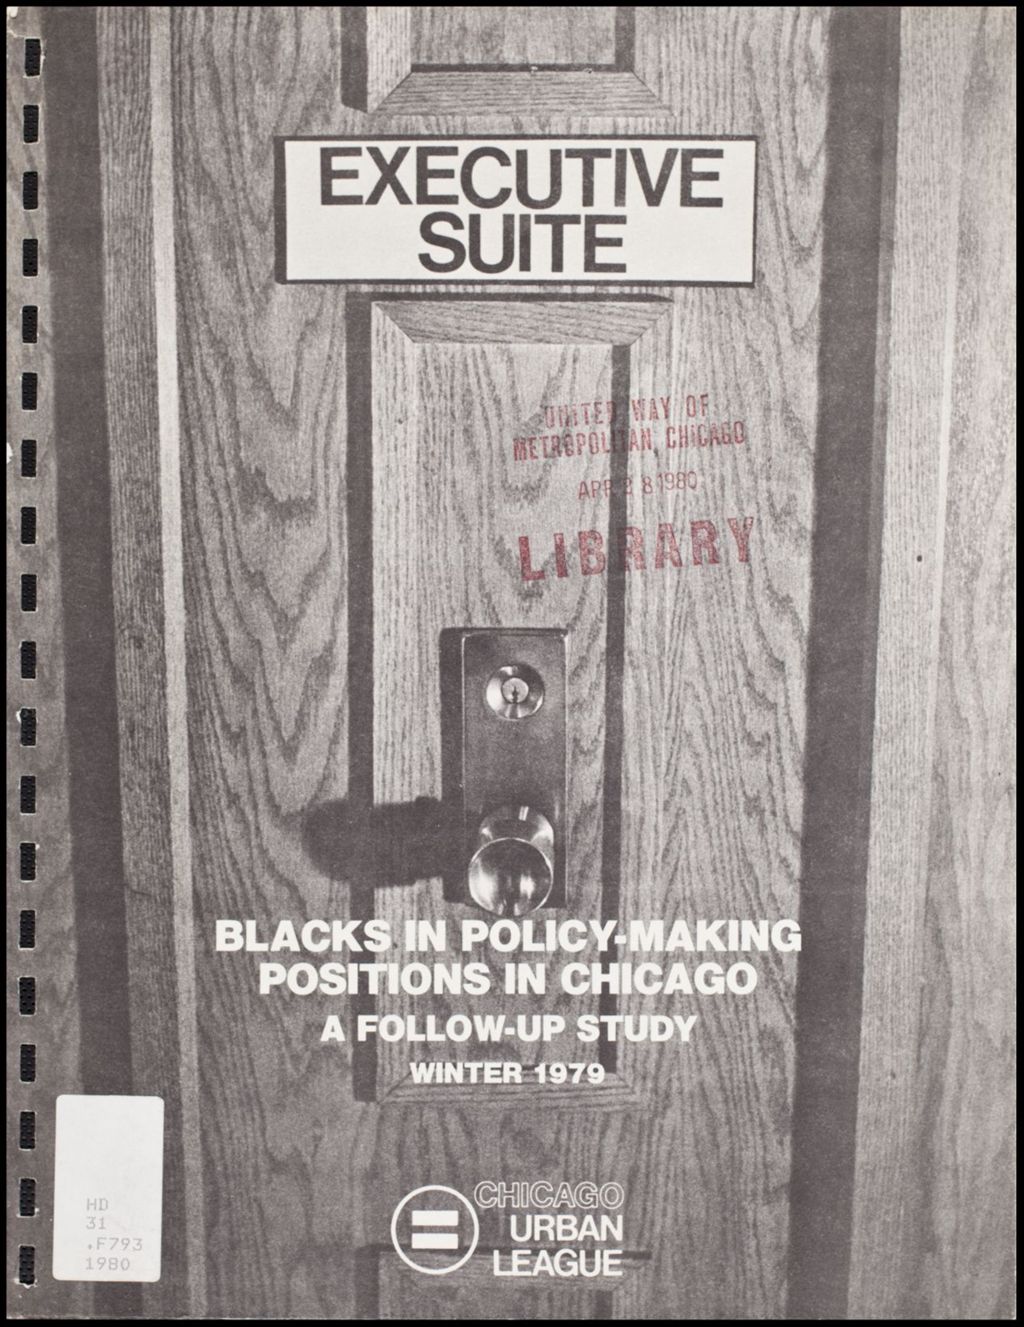 Miniature of Study: Blacks in Policy Making Positions in Chicago, 1979 (Folder IV-734a)